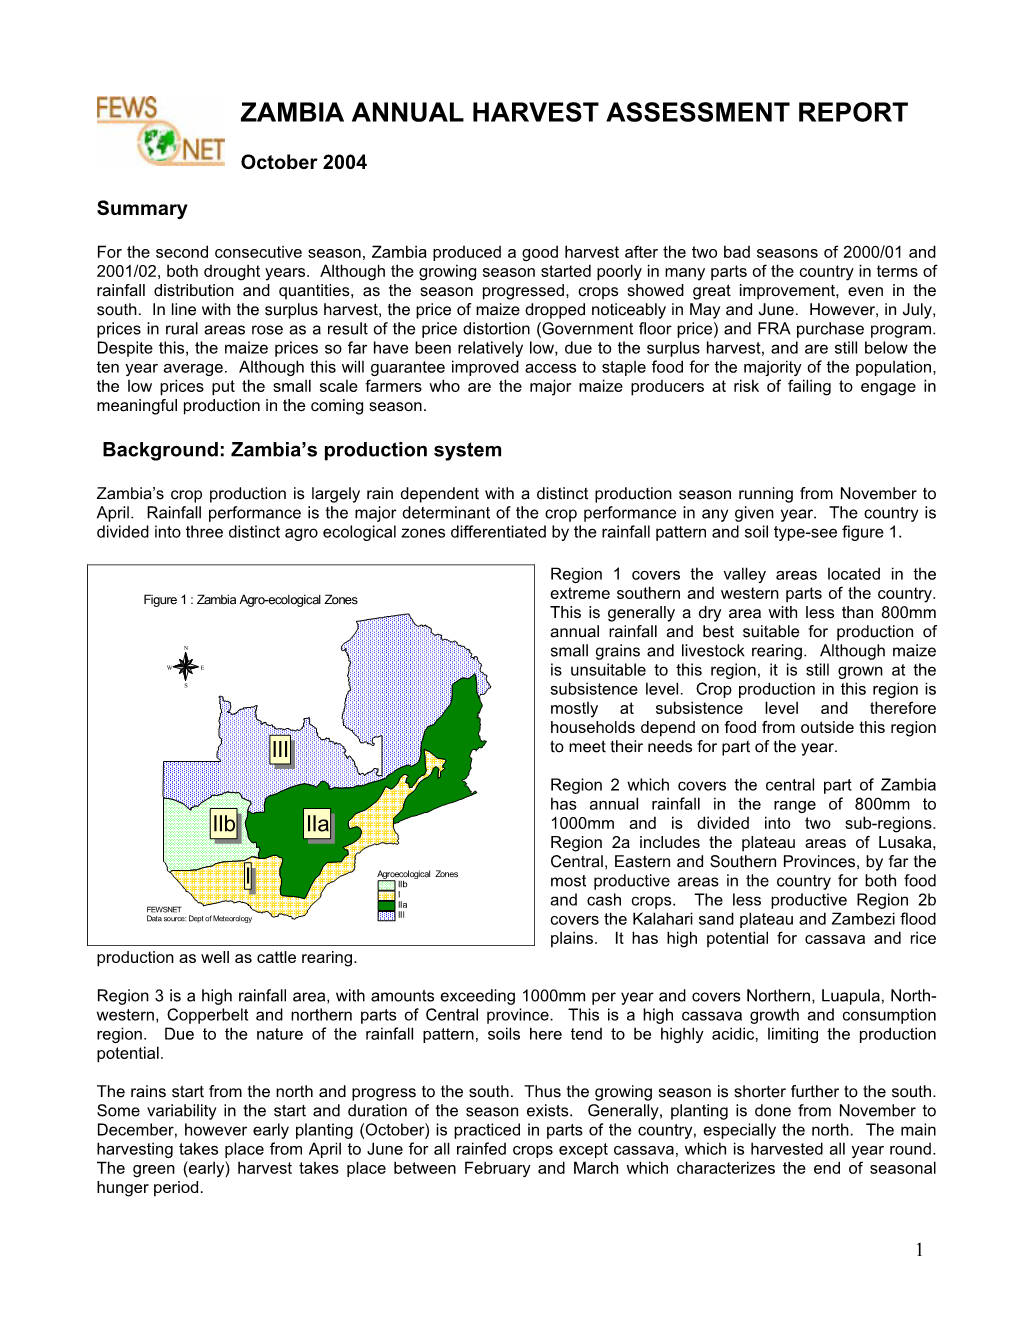 Zambia Annual Harvest Assessment Report